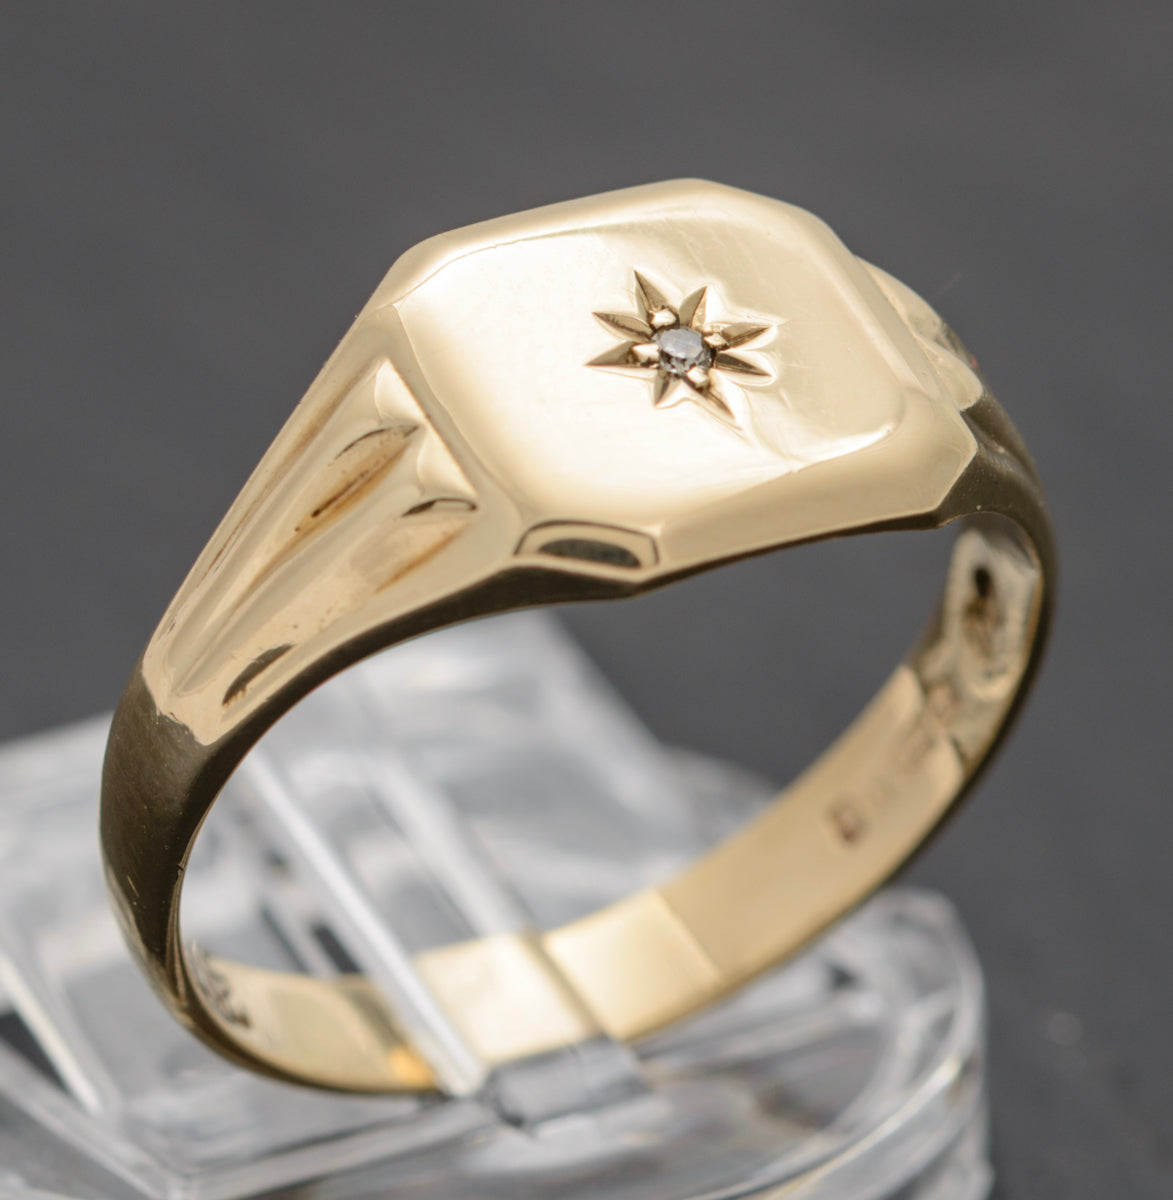 Vintage 9ct Gold Classic Men's Signet Ring With Central Diamond Birmingham 1981 (A1557)